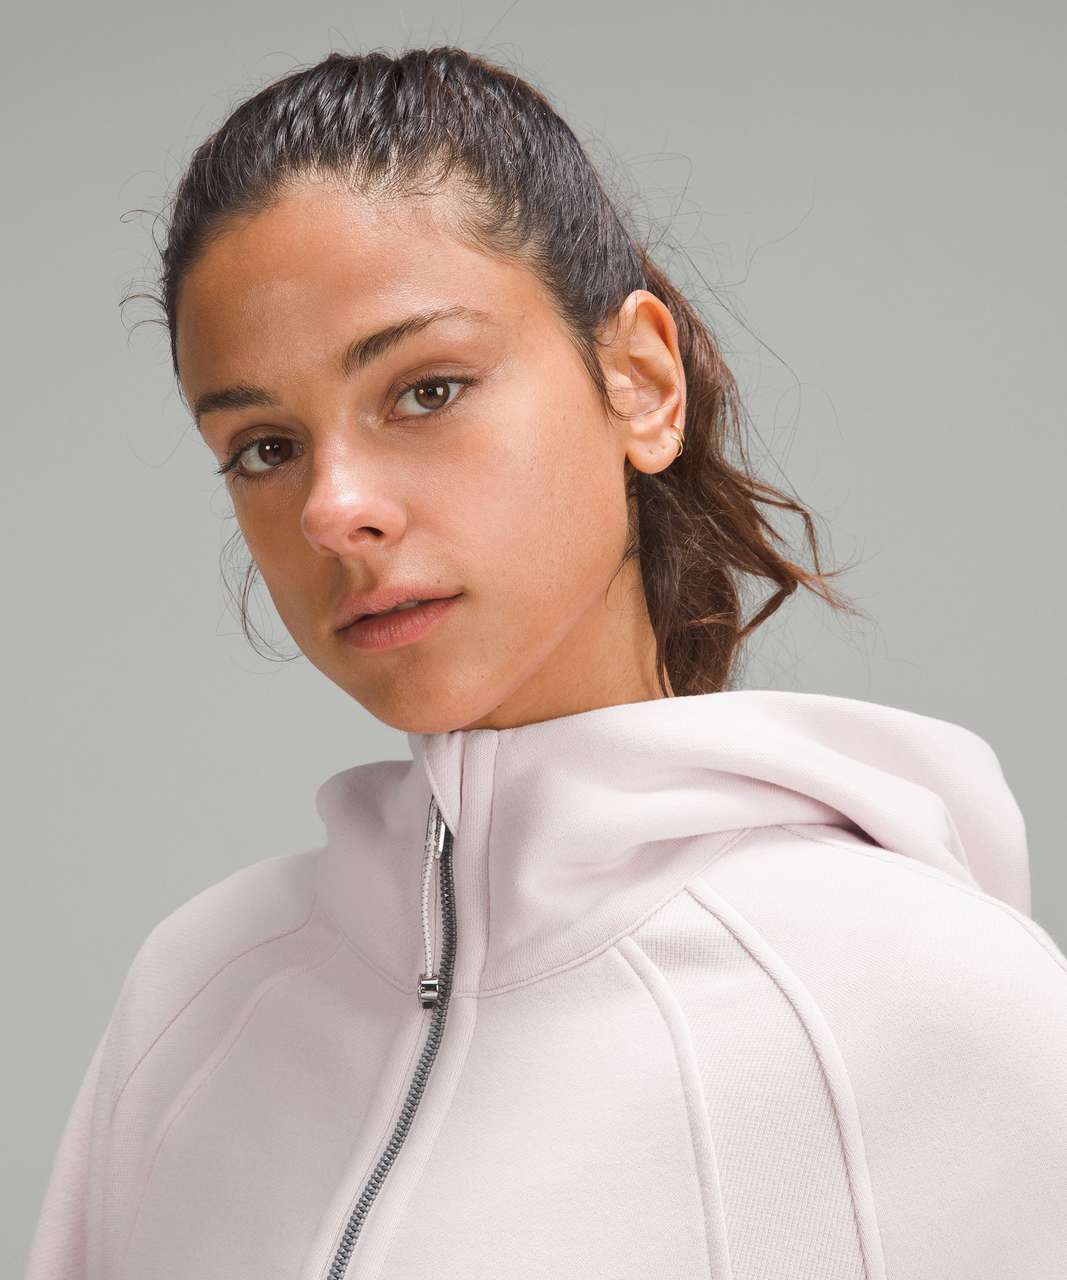 The new Scuba Oversized Half-Zip Hoodie in Heathered Pink Taupe